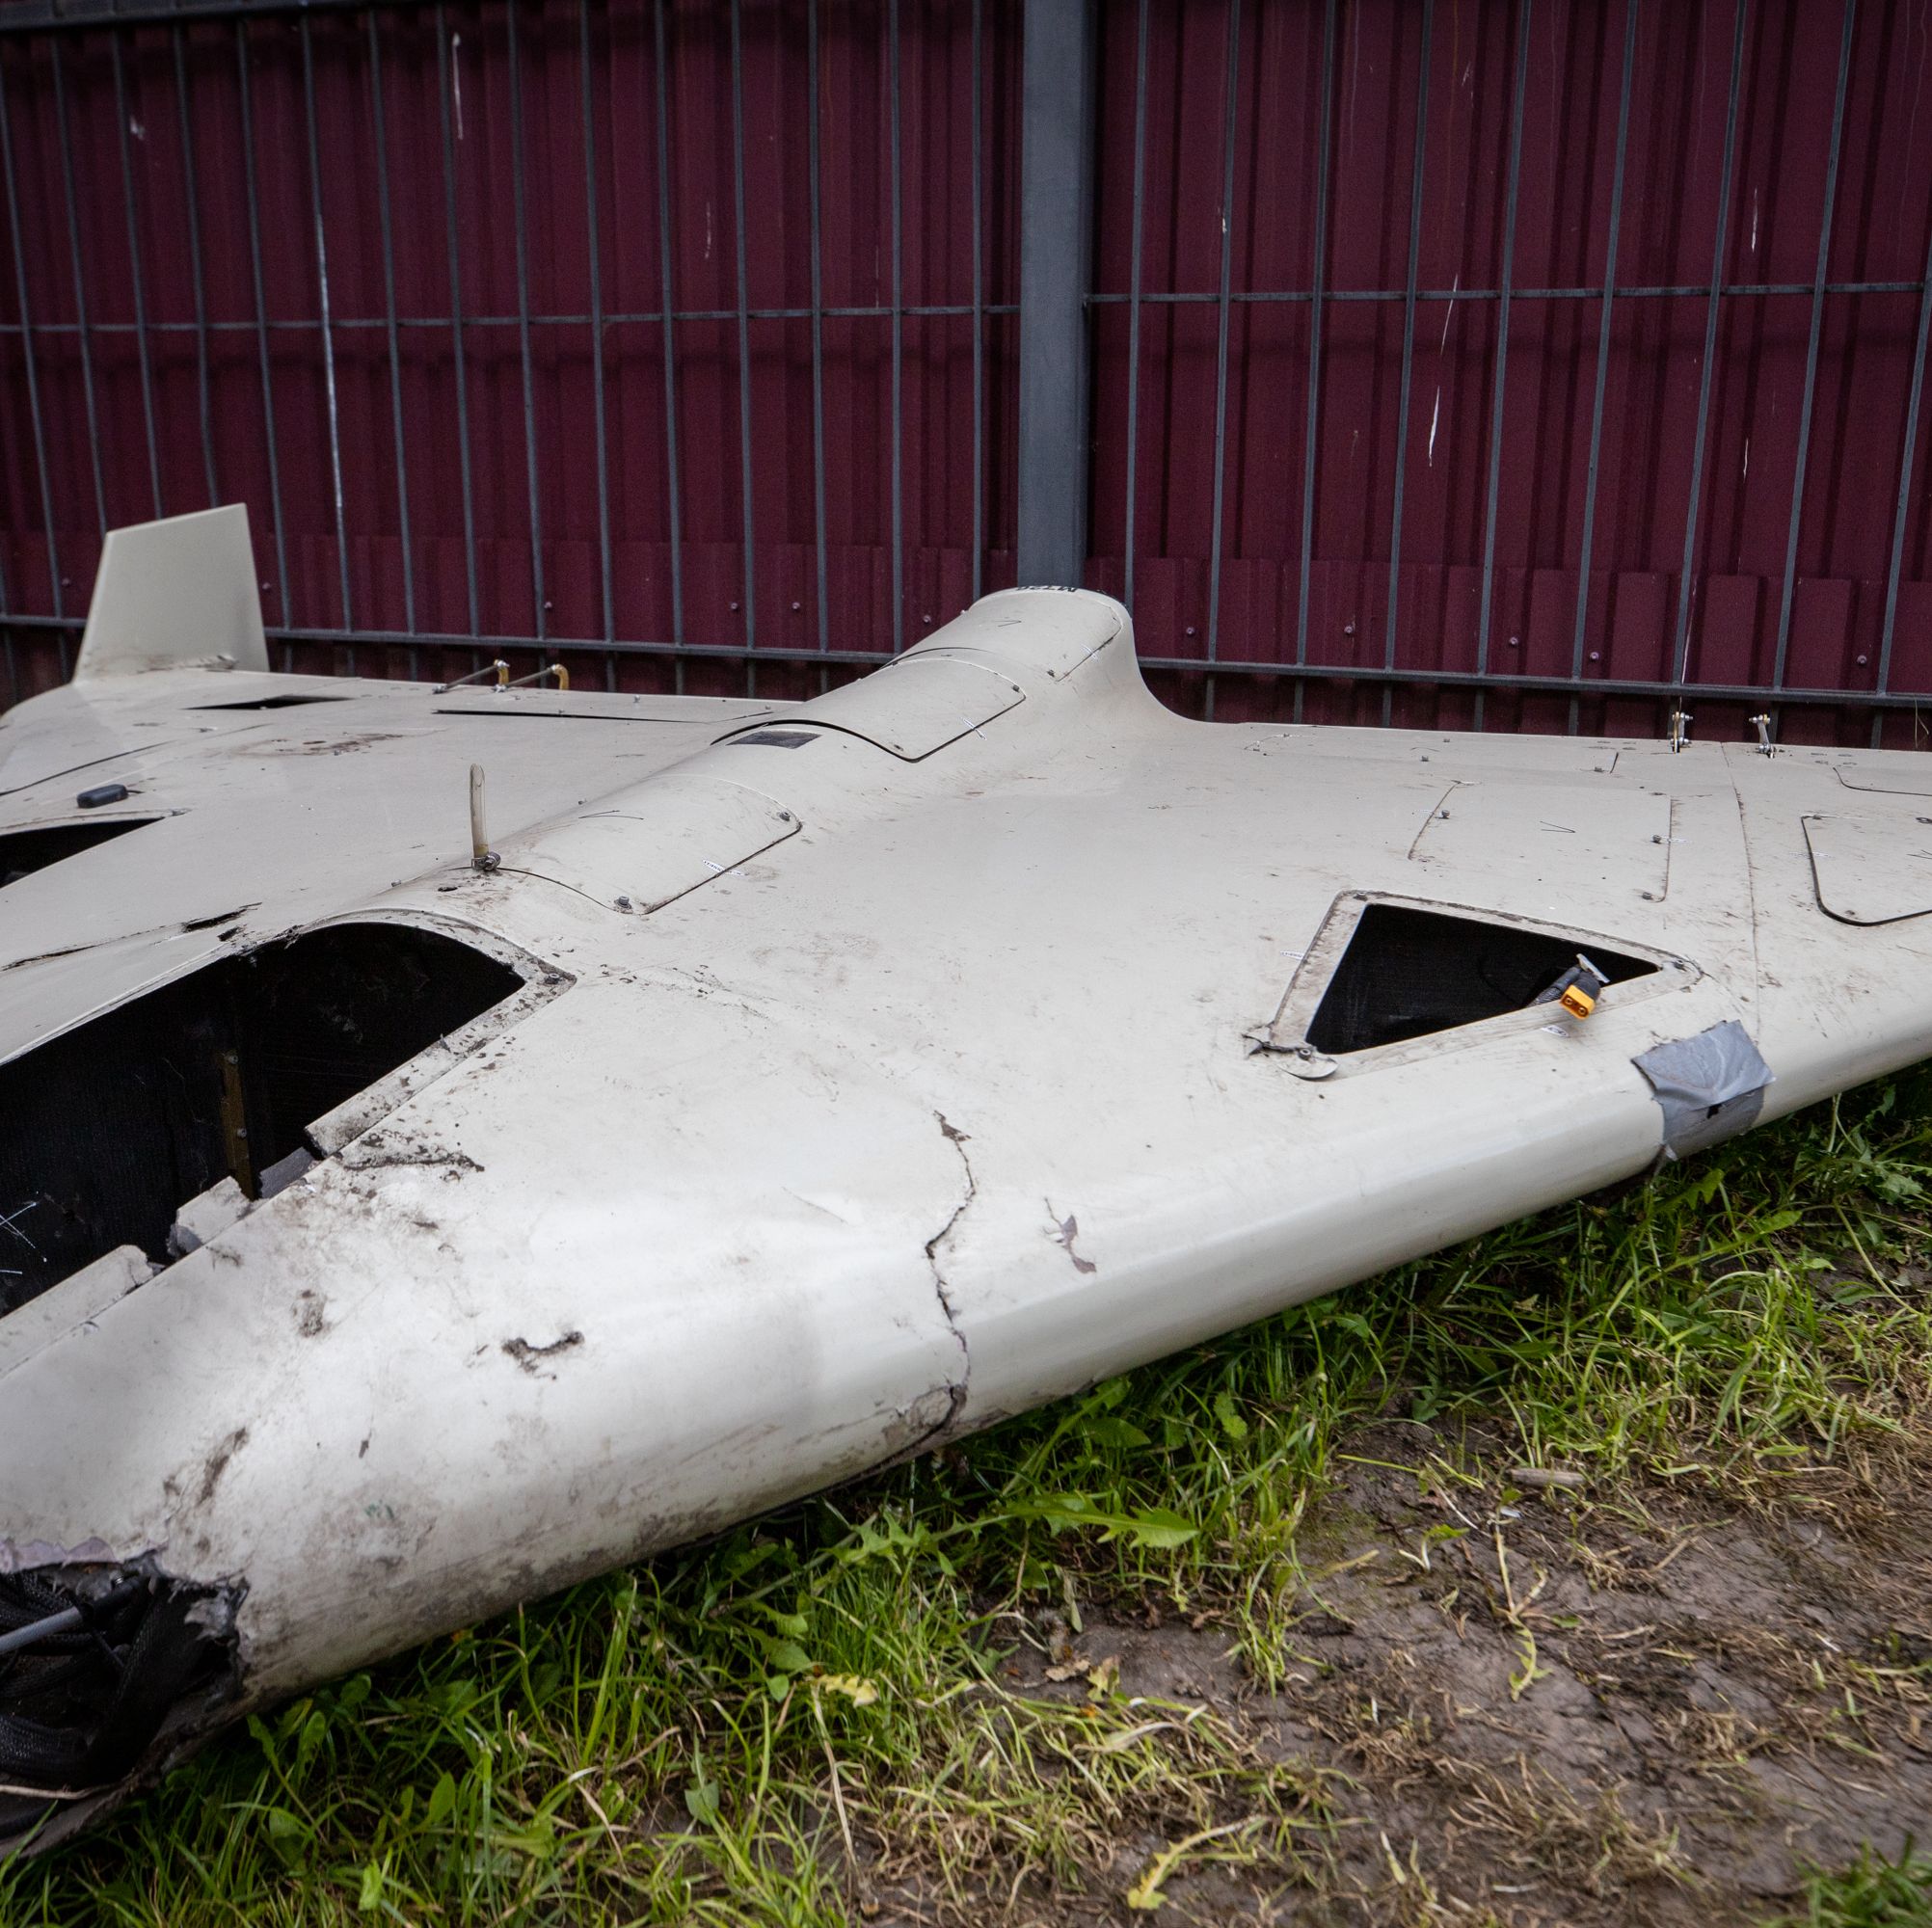 Report: Russia Is Using Teens to Build Iranian-Style Kamikaze Drones